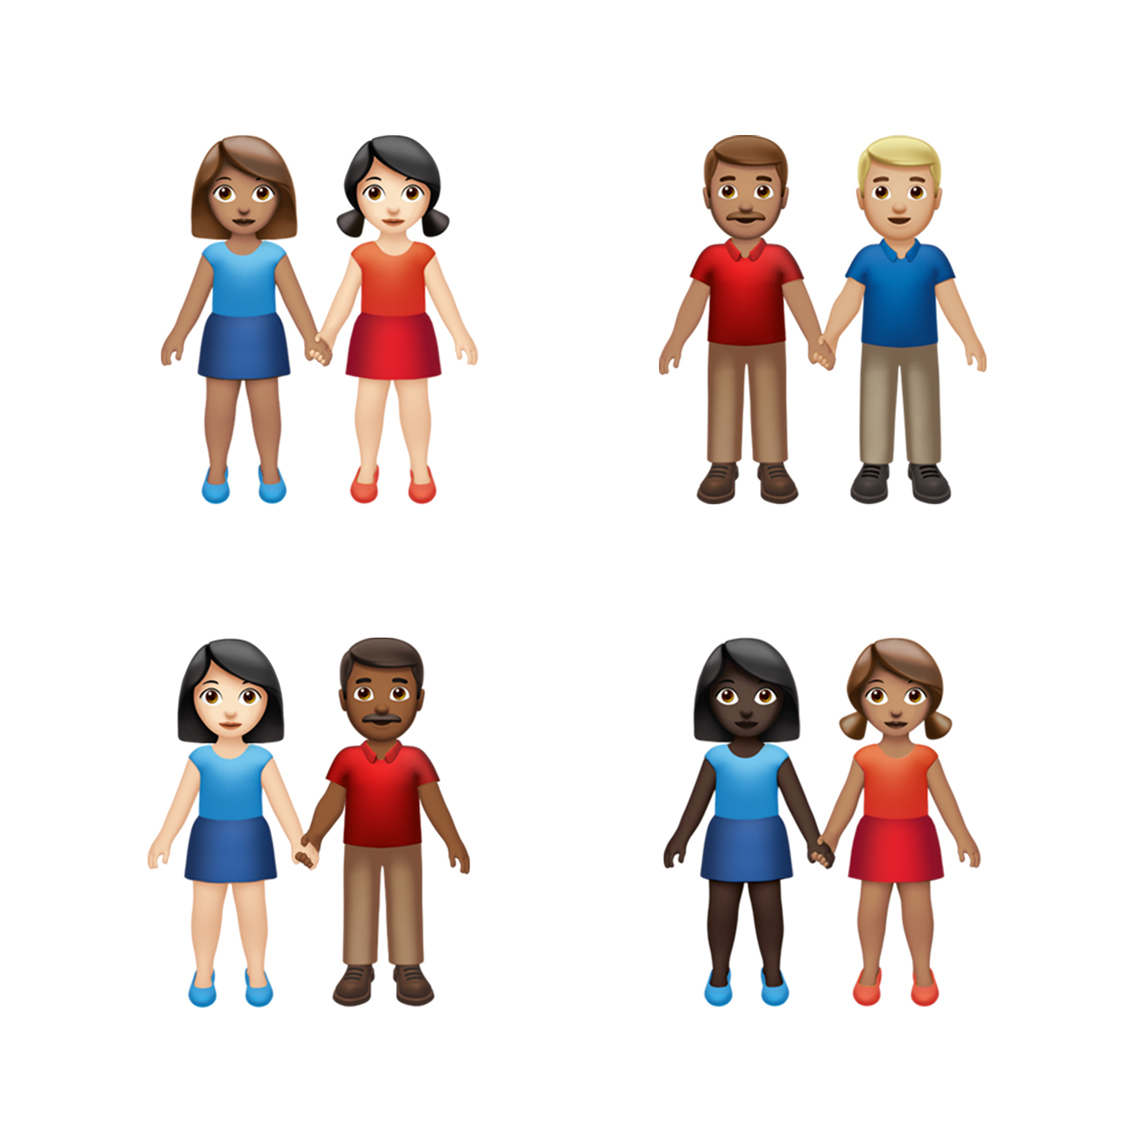 The image shows the upcoming IOS 13.0 update that will includes emojis where users can choose couples with various skin tones and genders to hold hands. (Curtesy of Apple)